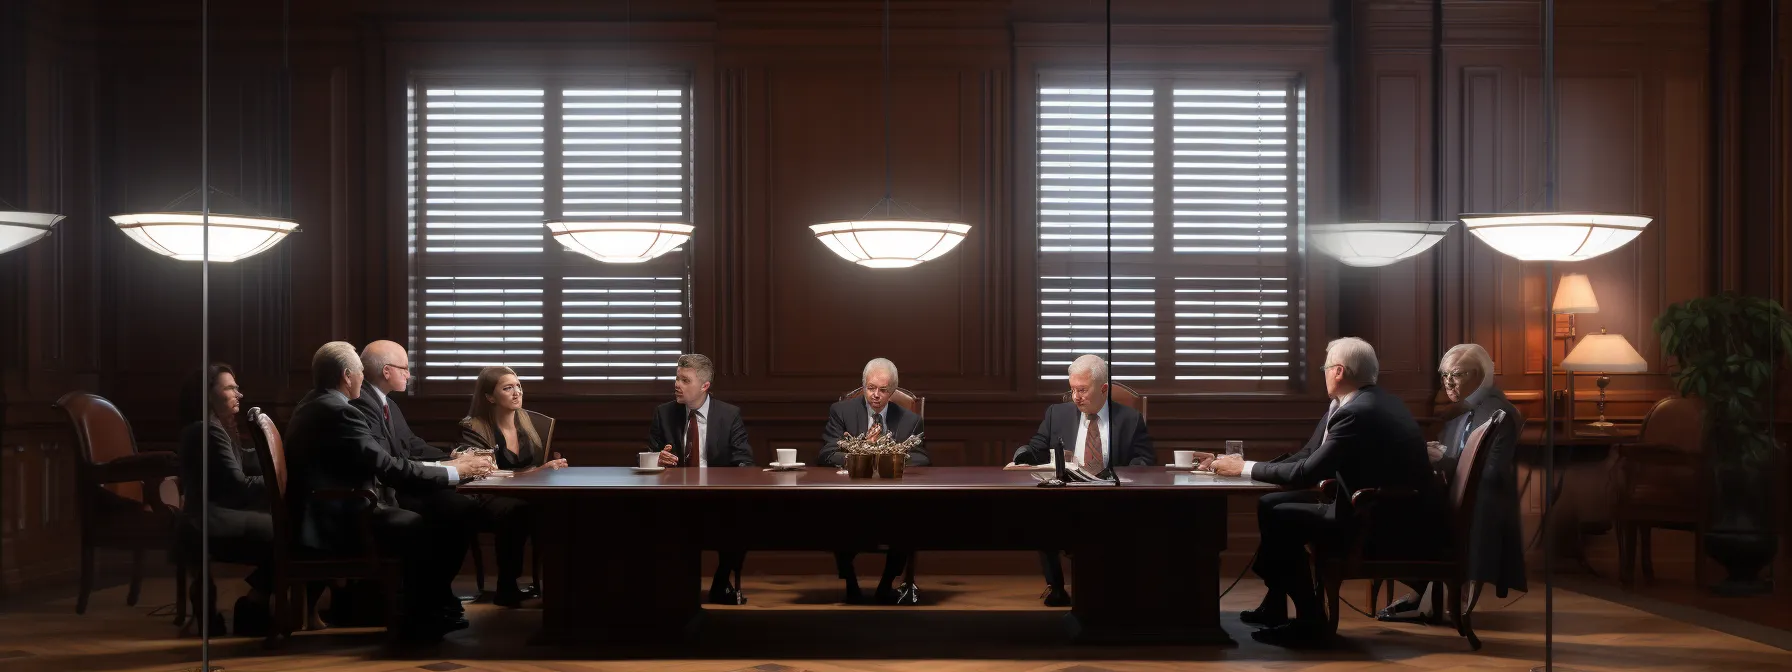 arbitrators conducting hearings and deliberating on a dispute.